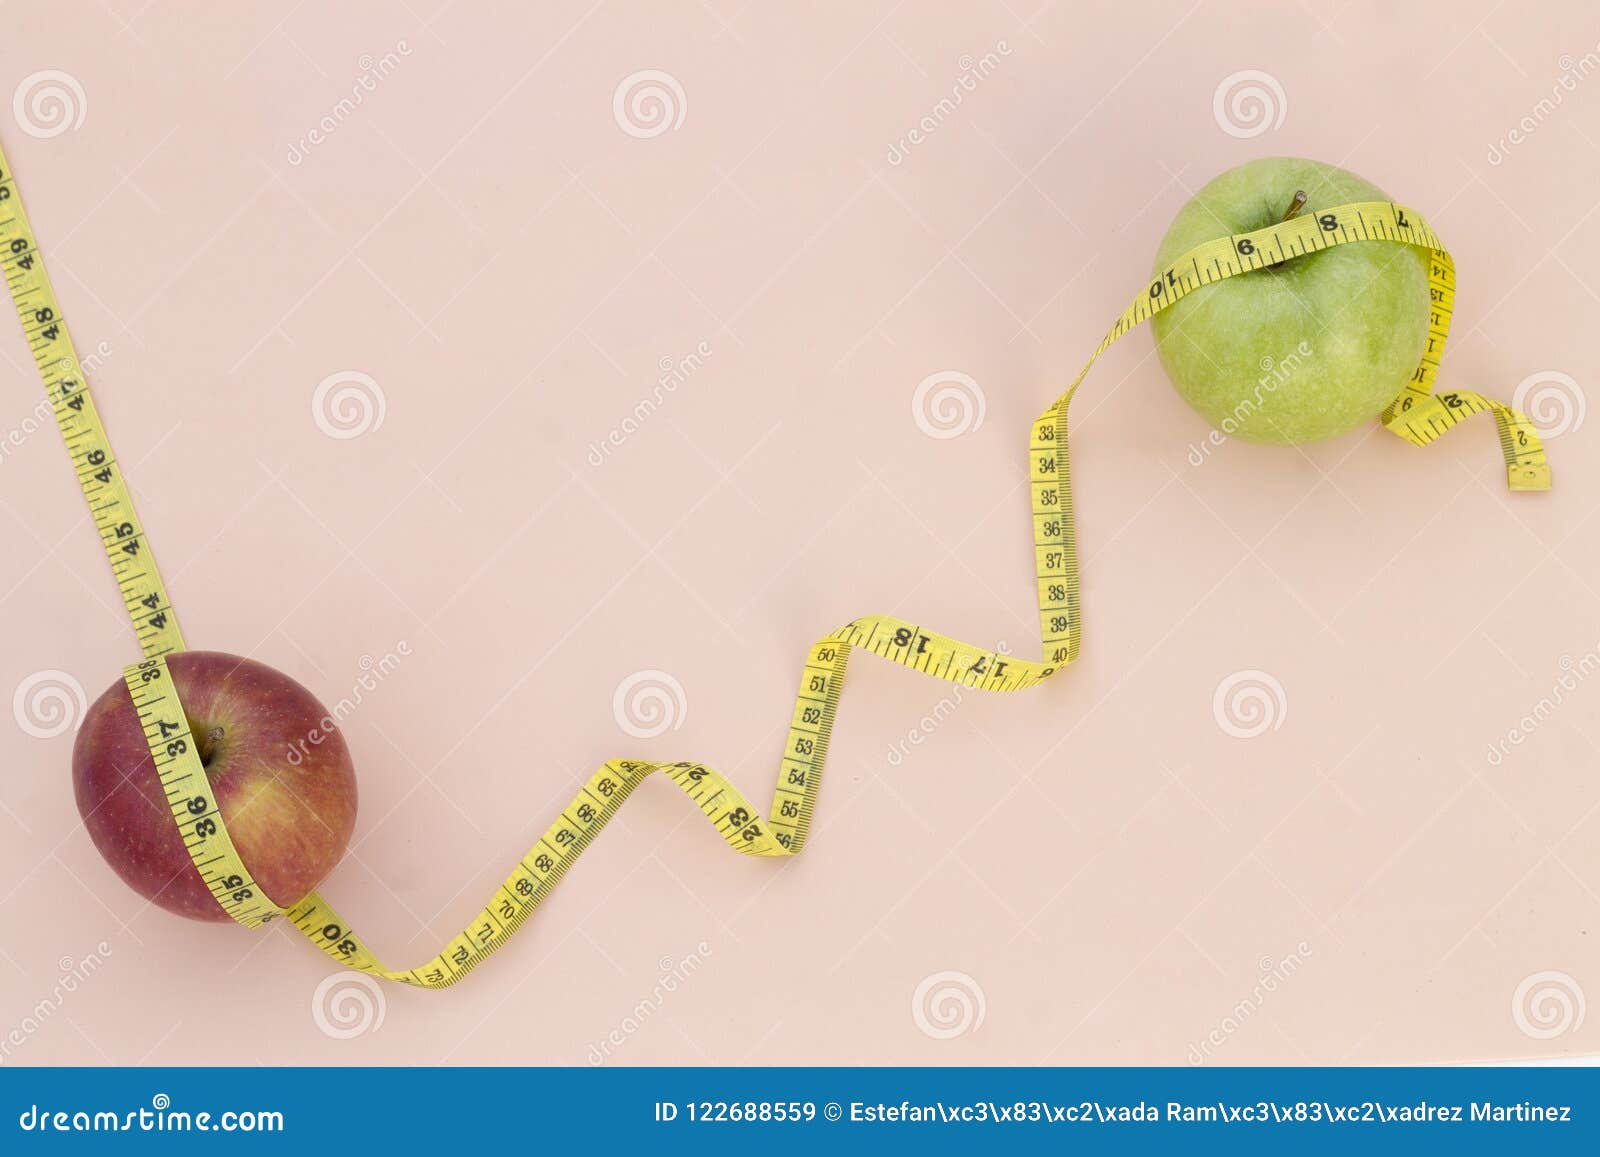 still life photography with two apples, tape mesaure